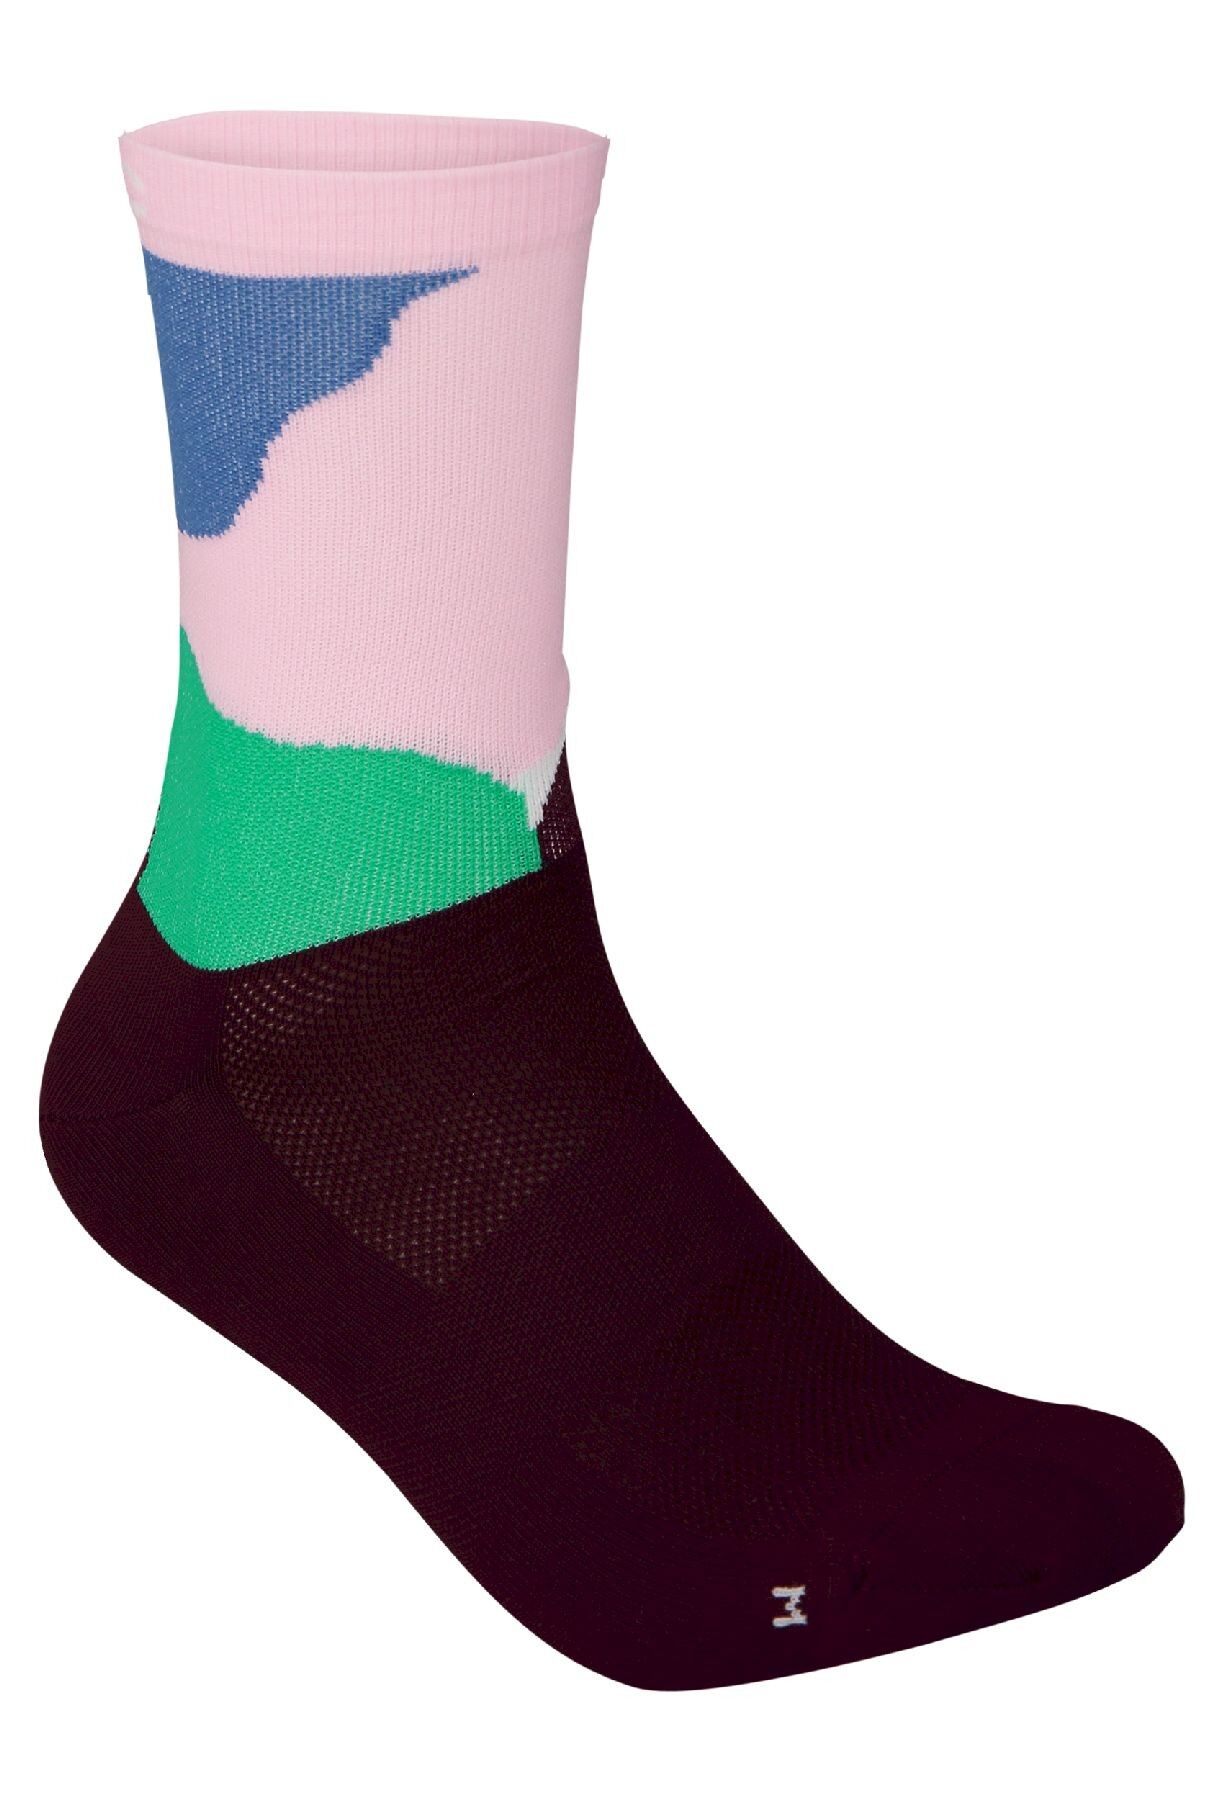 Calcetines Bicicletas, Calcetines Ciclismo – The Print Socks